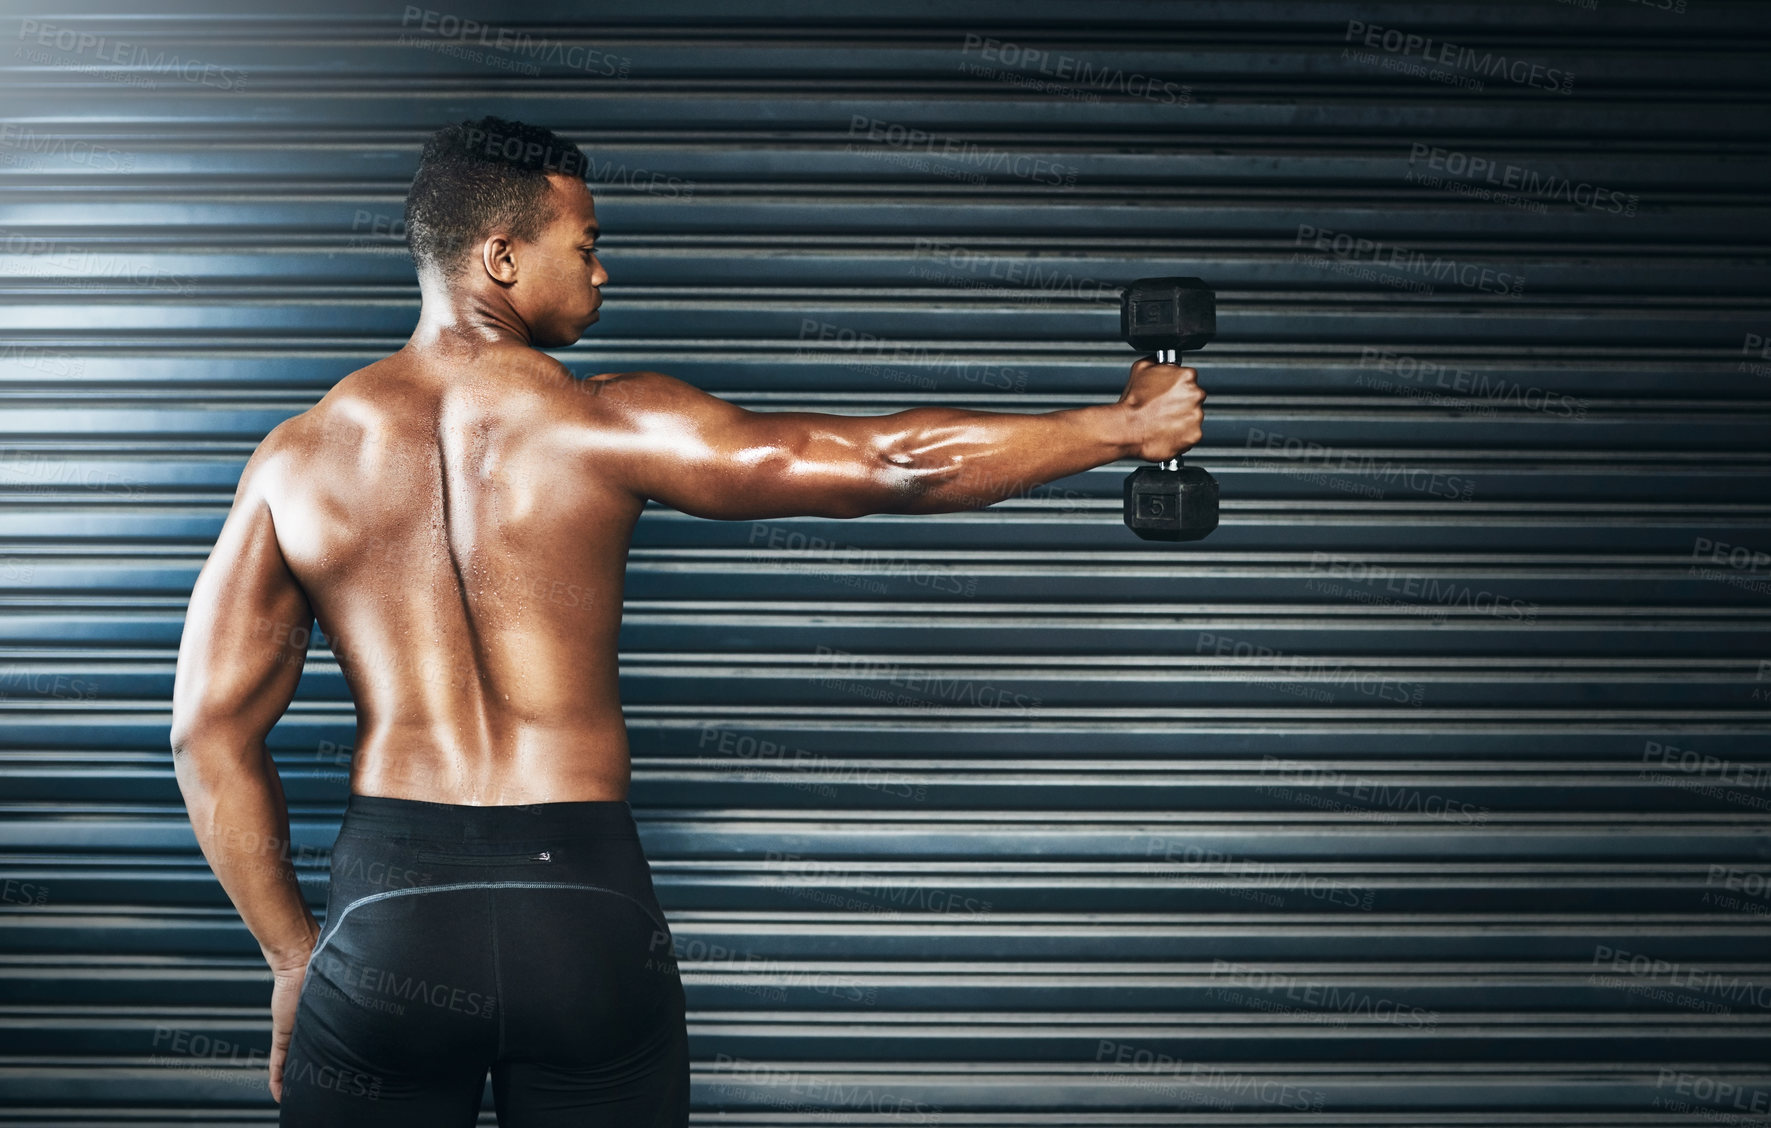 Buy stock photo Rearview shot of a muscular young man lifting weights against a grey background